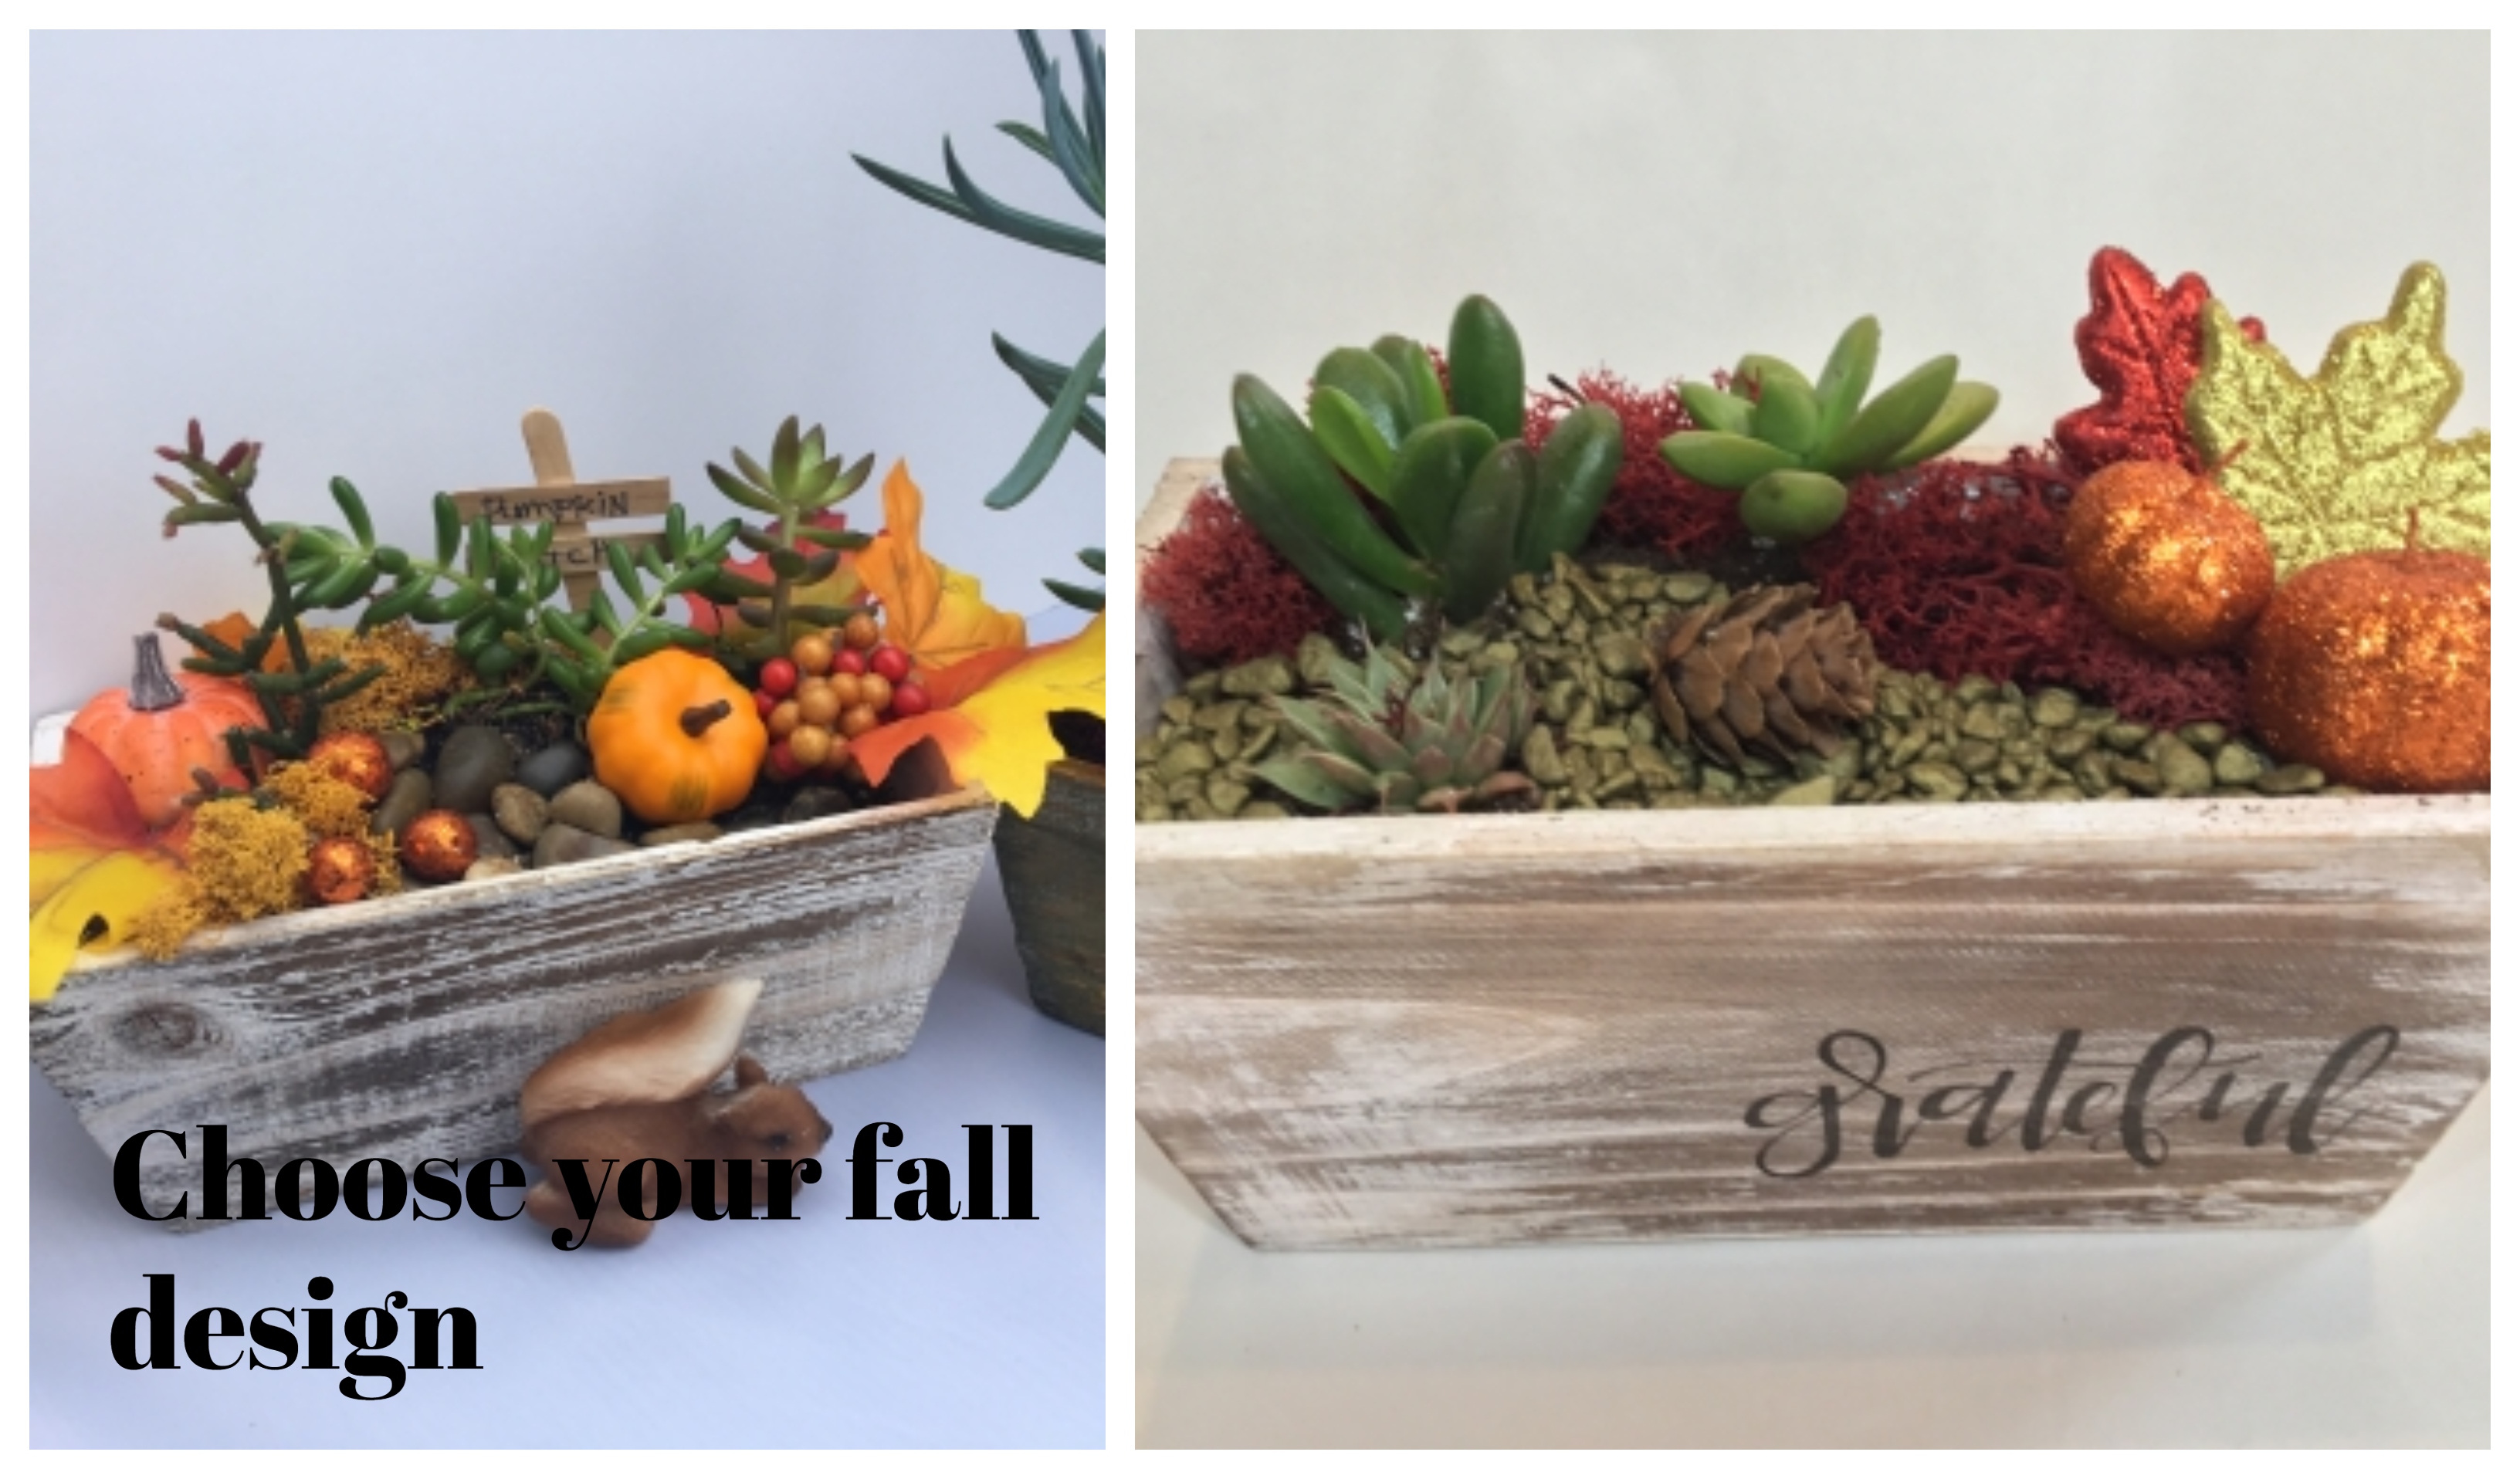 A Choose to Fall Today plant nite project by Yaymaker